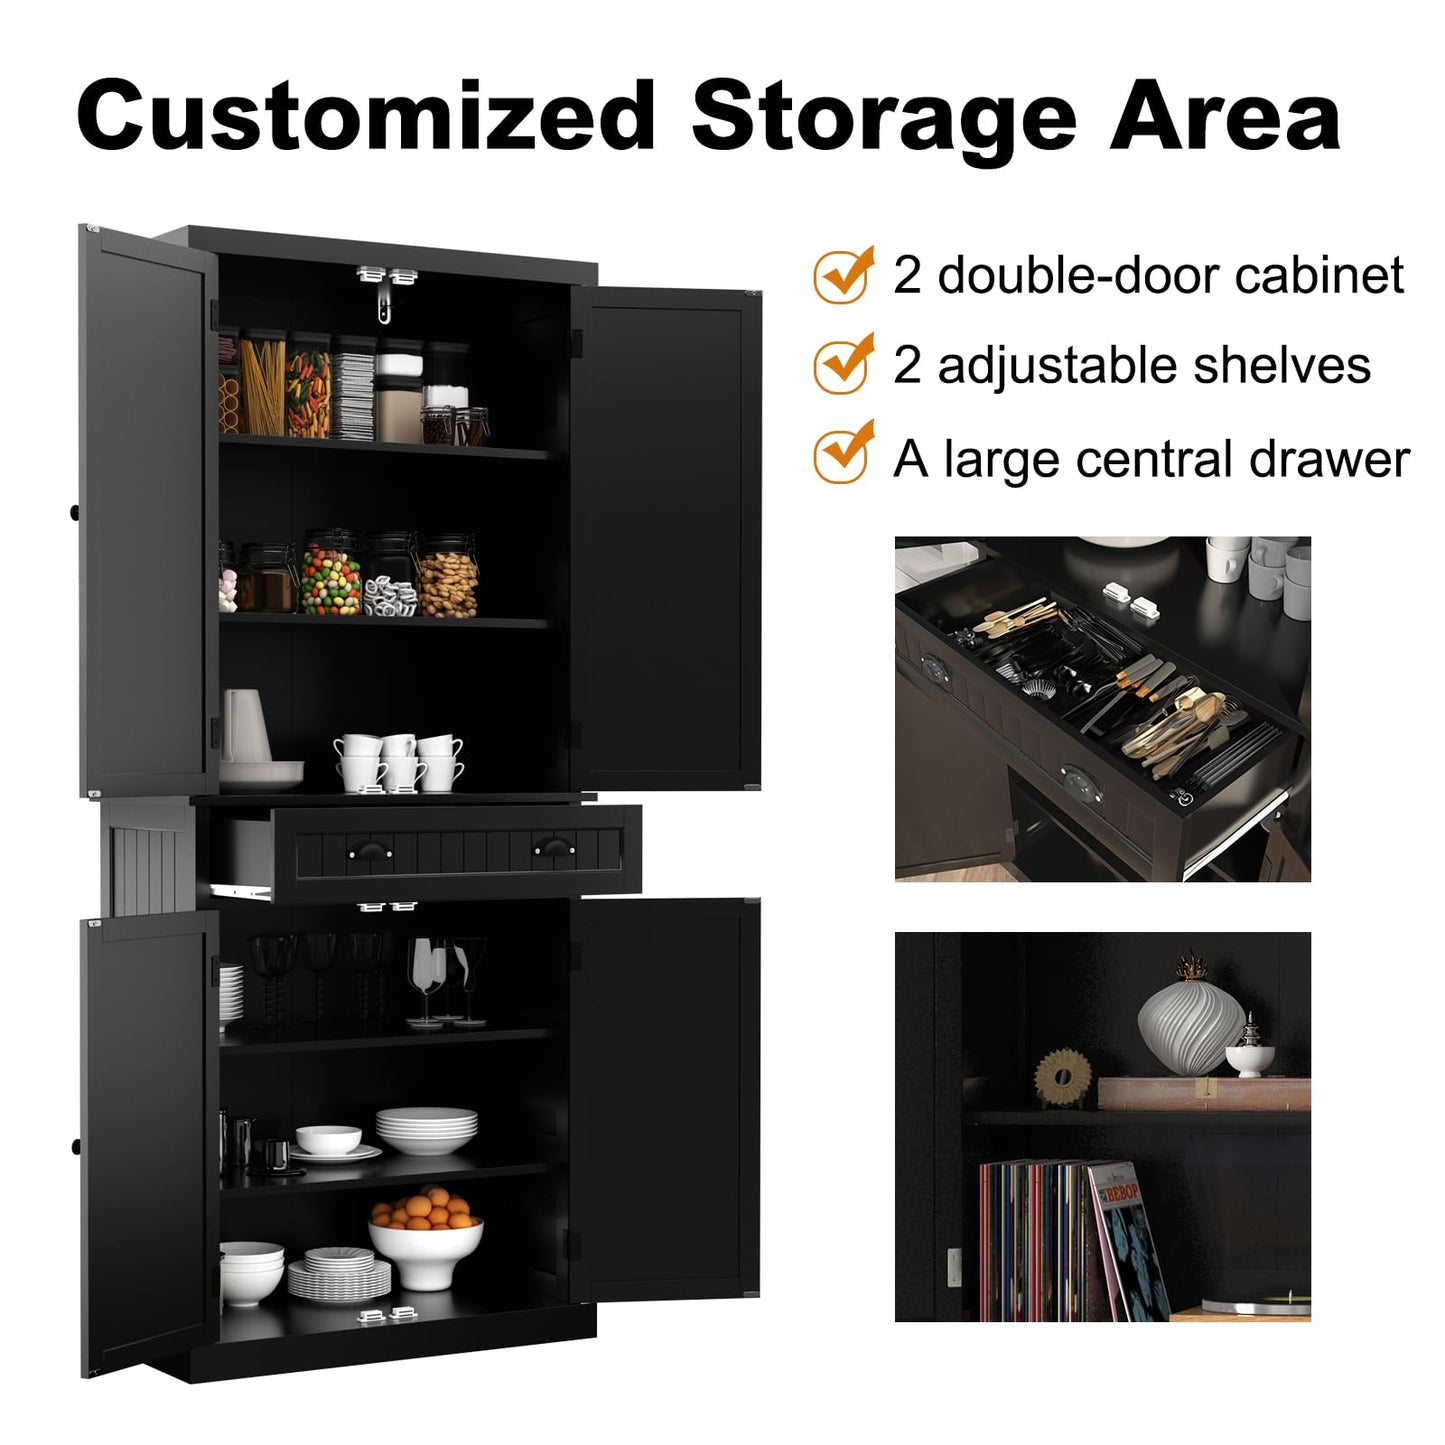 ARTPOWER Kitchen Pantry Storage Cabinet with Drawer and Adjustable Shelves, Pantry Cabinet for Kitchen, Bathroom or Hallway, Black